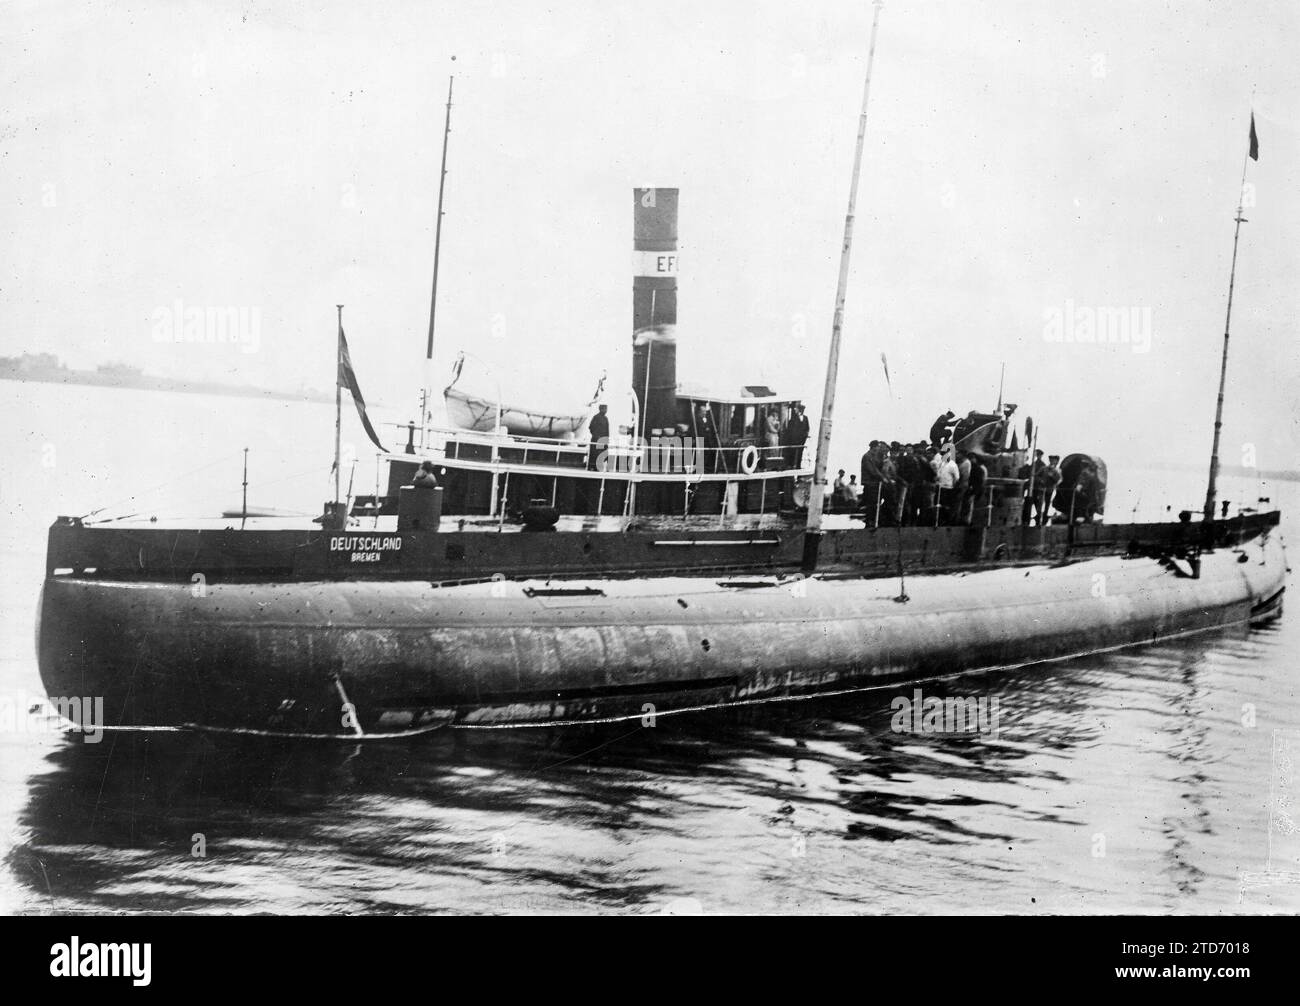 Baltimore (United States), July 1916. German commercial submarines. In the image, the "Deutschland" anchored in the port of Baltimore, after its crossing of the Atlantic. Credit: Album / Archivo ABC / Underwood & Underwood Stock Photo